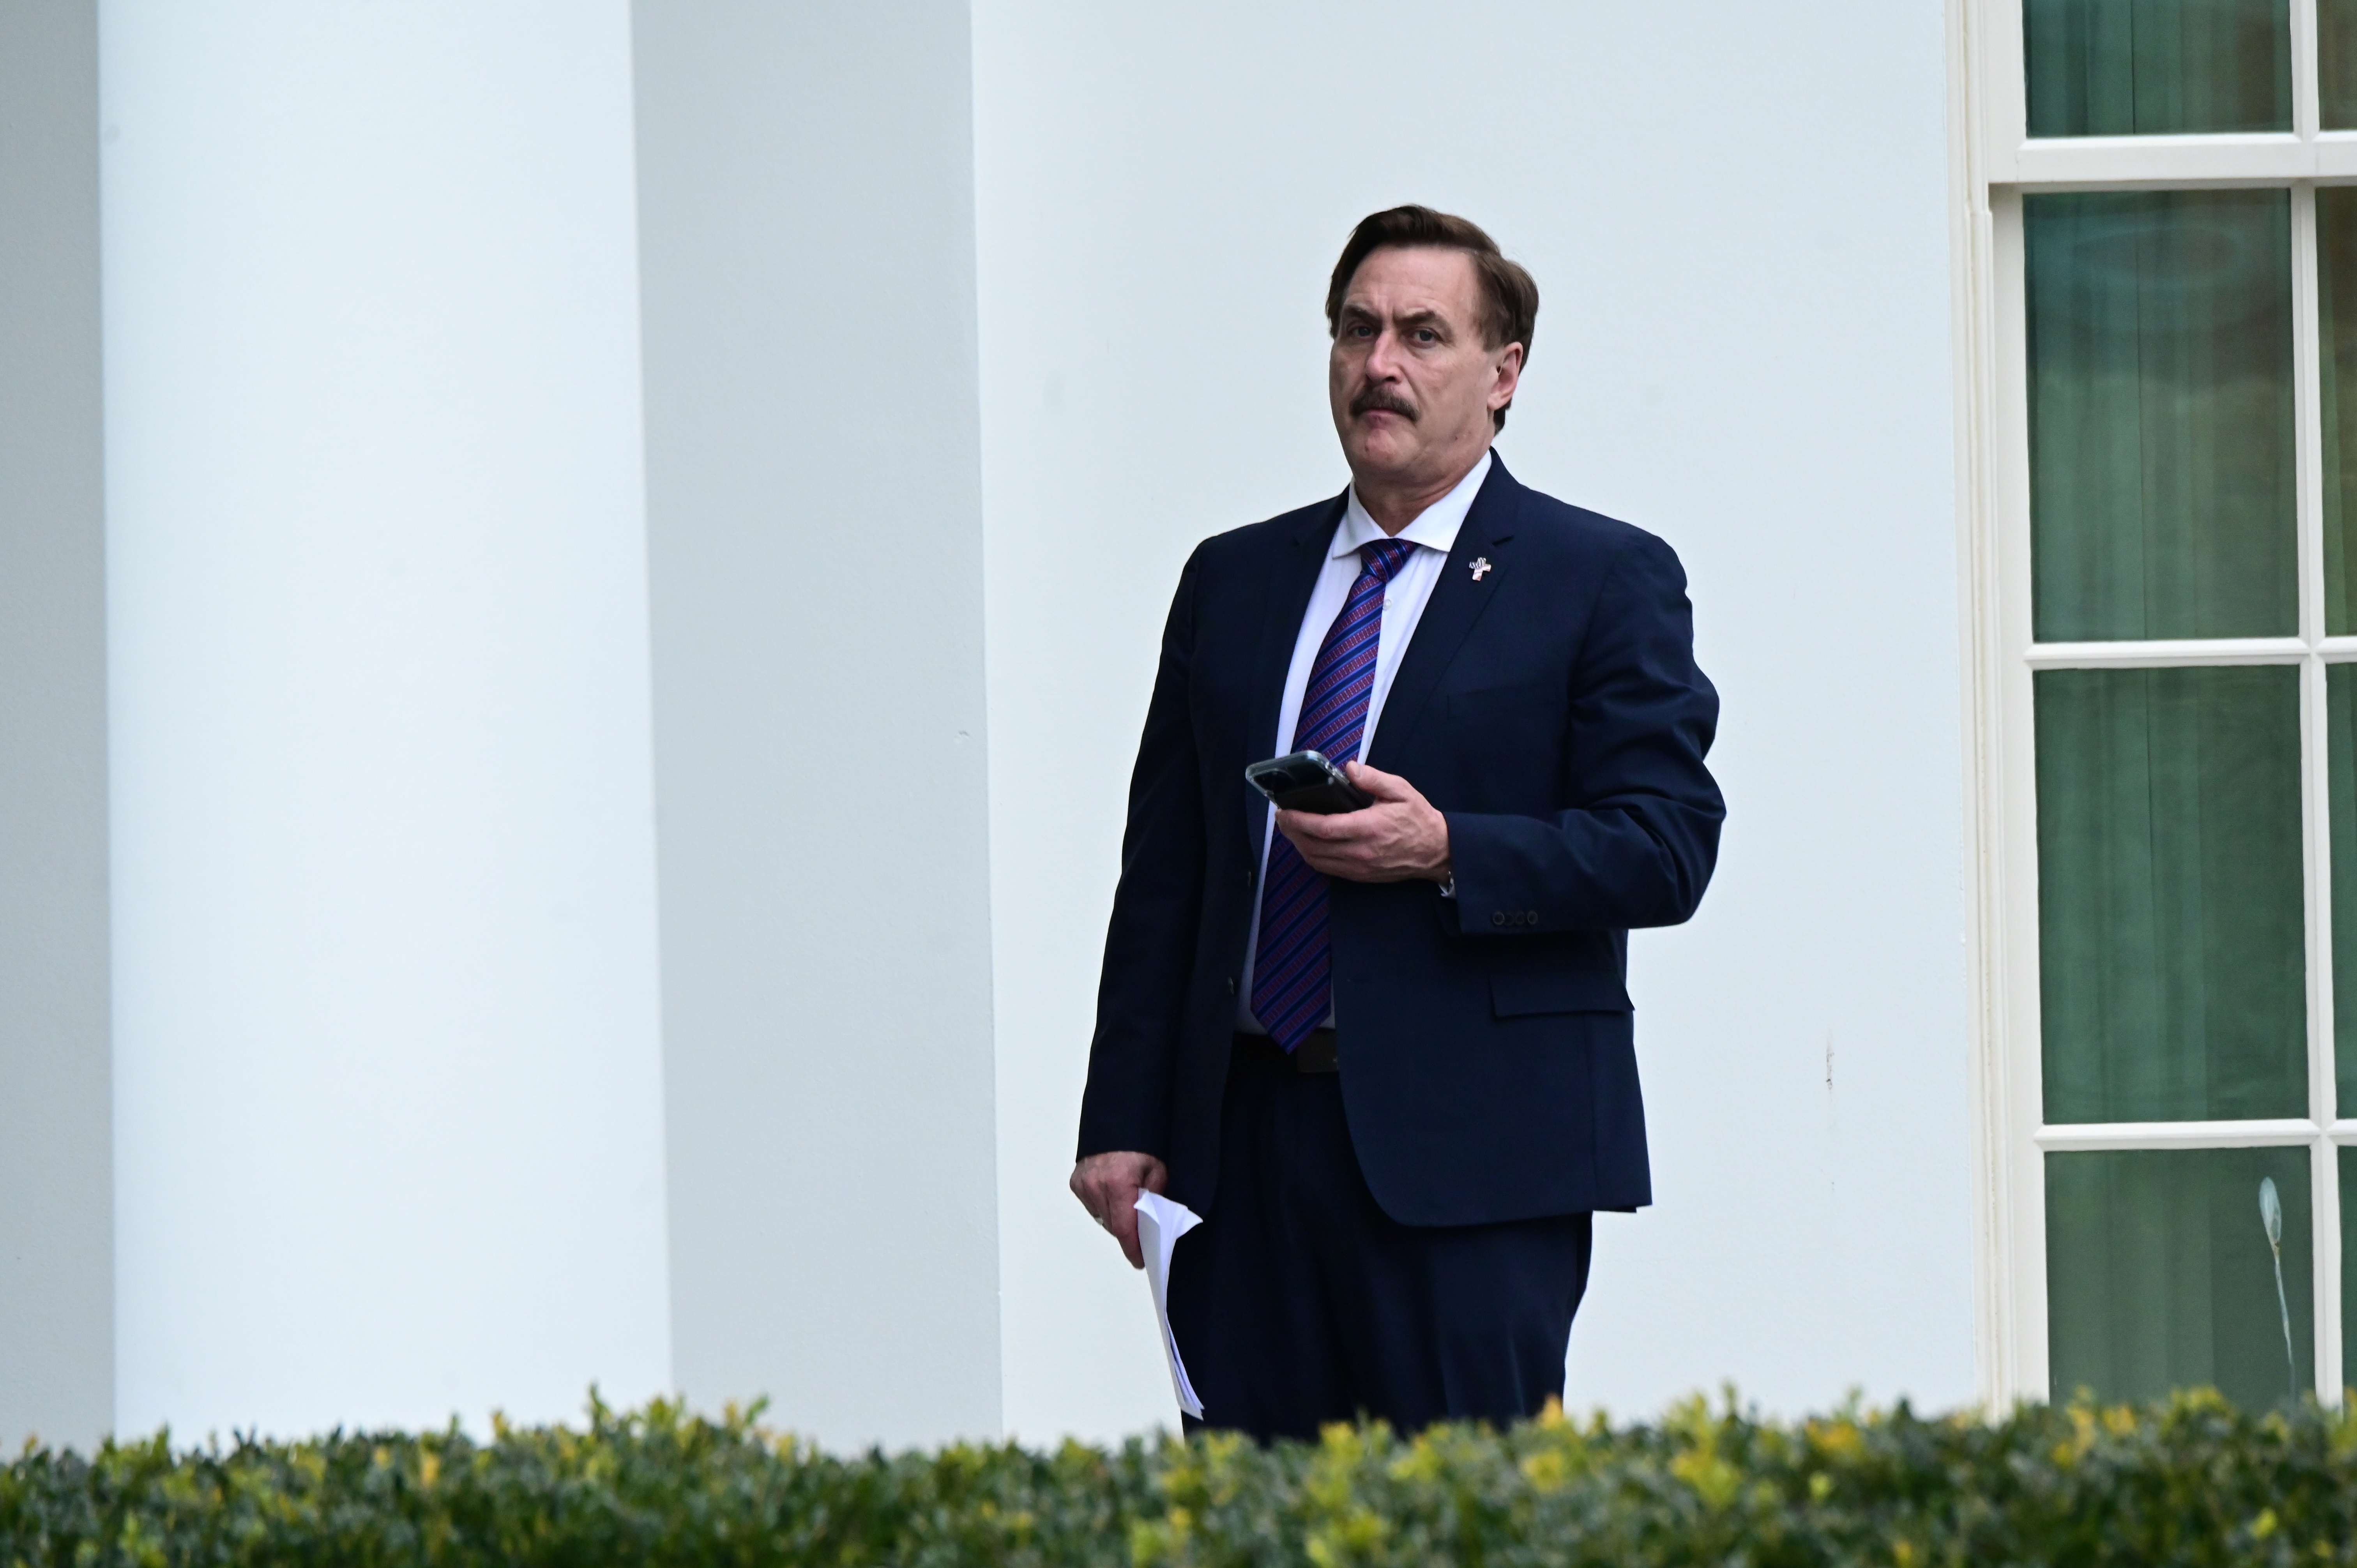 My Pillow Guy Mike Lindell Gets Canceled In Newsmax Interview